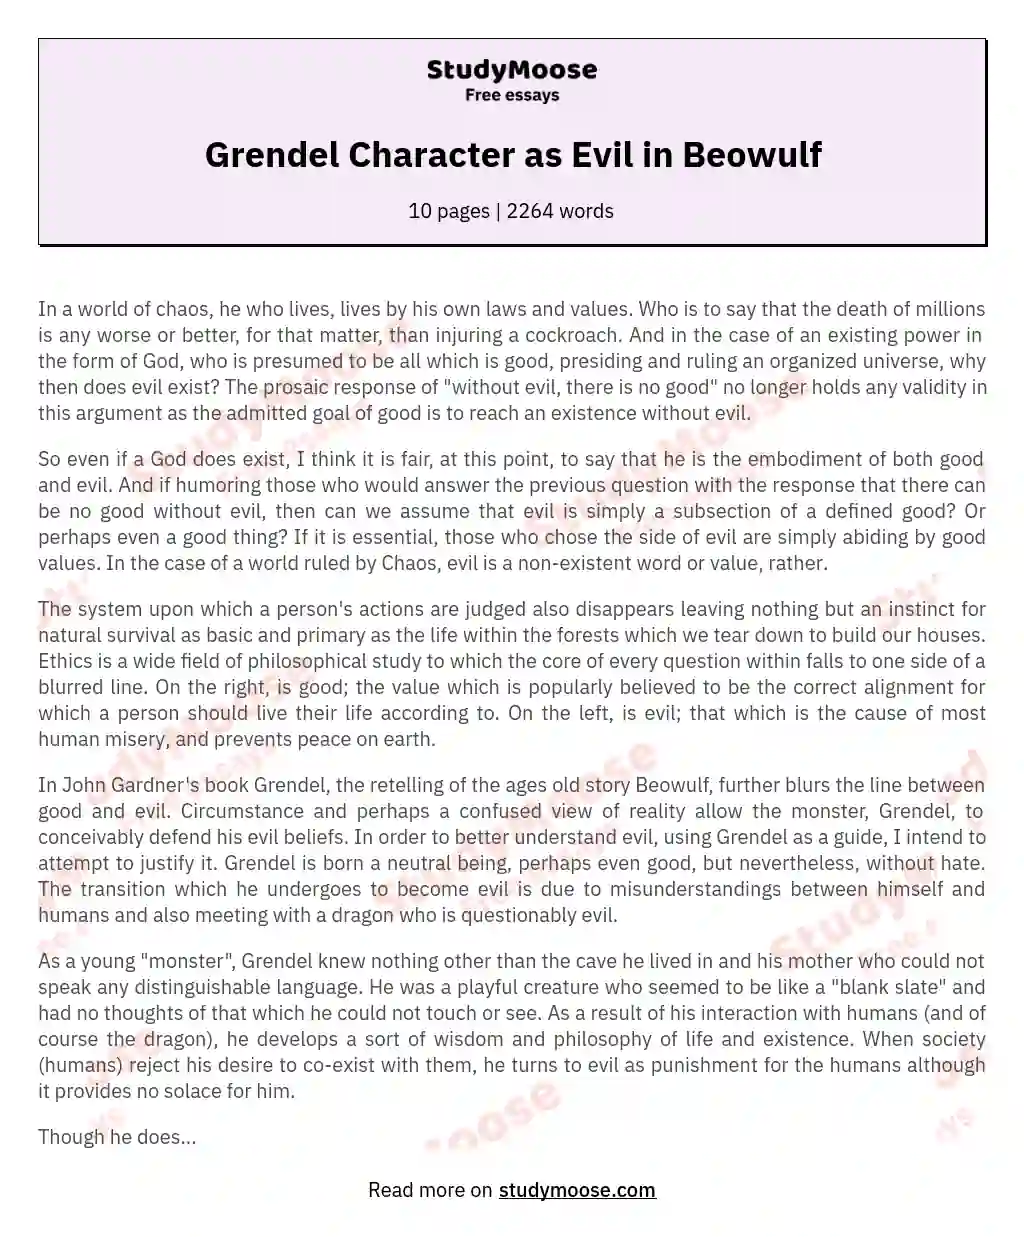 Grendel Character as Evil in Beowulf